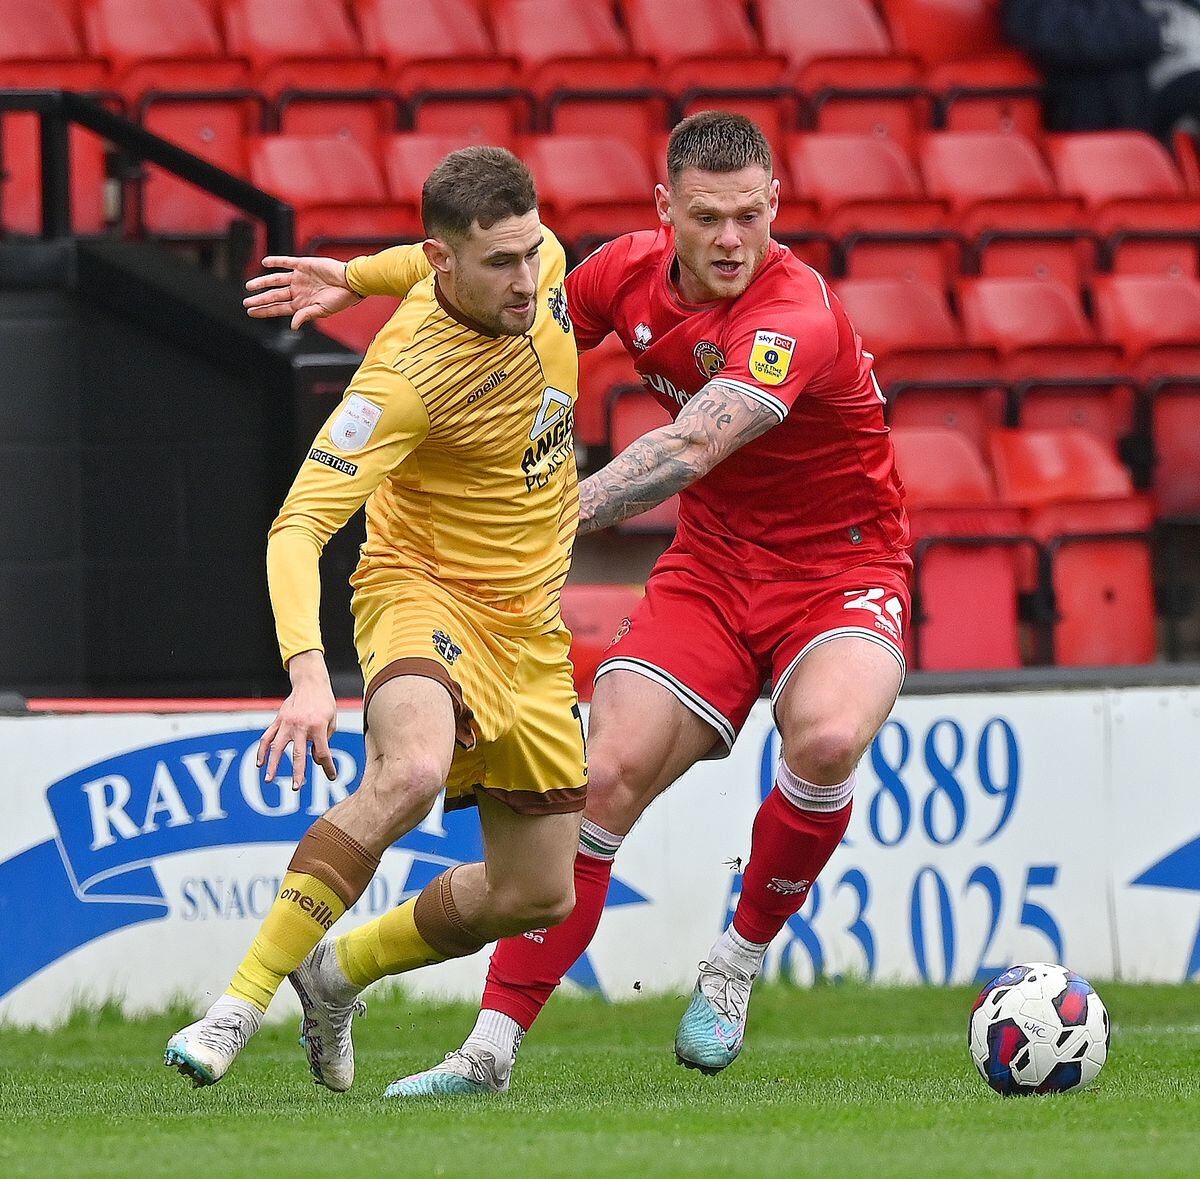 Walsall's Joe Low and Suttons Will Randall